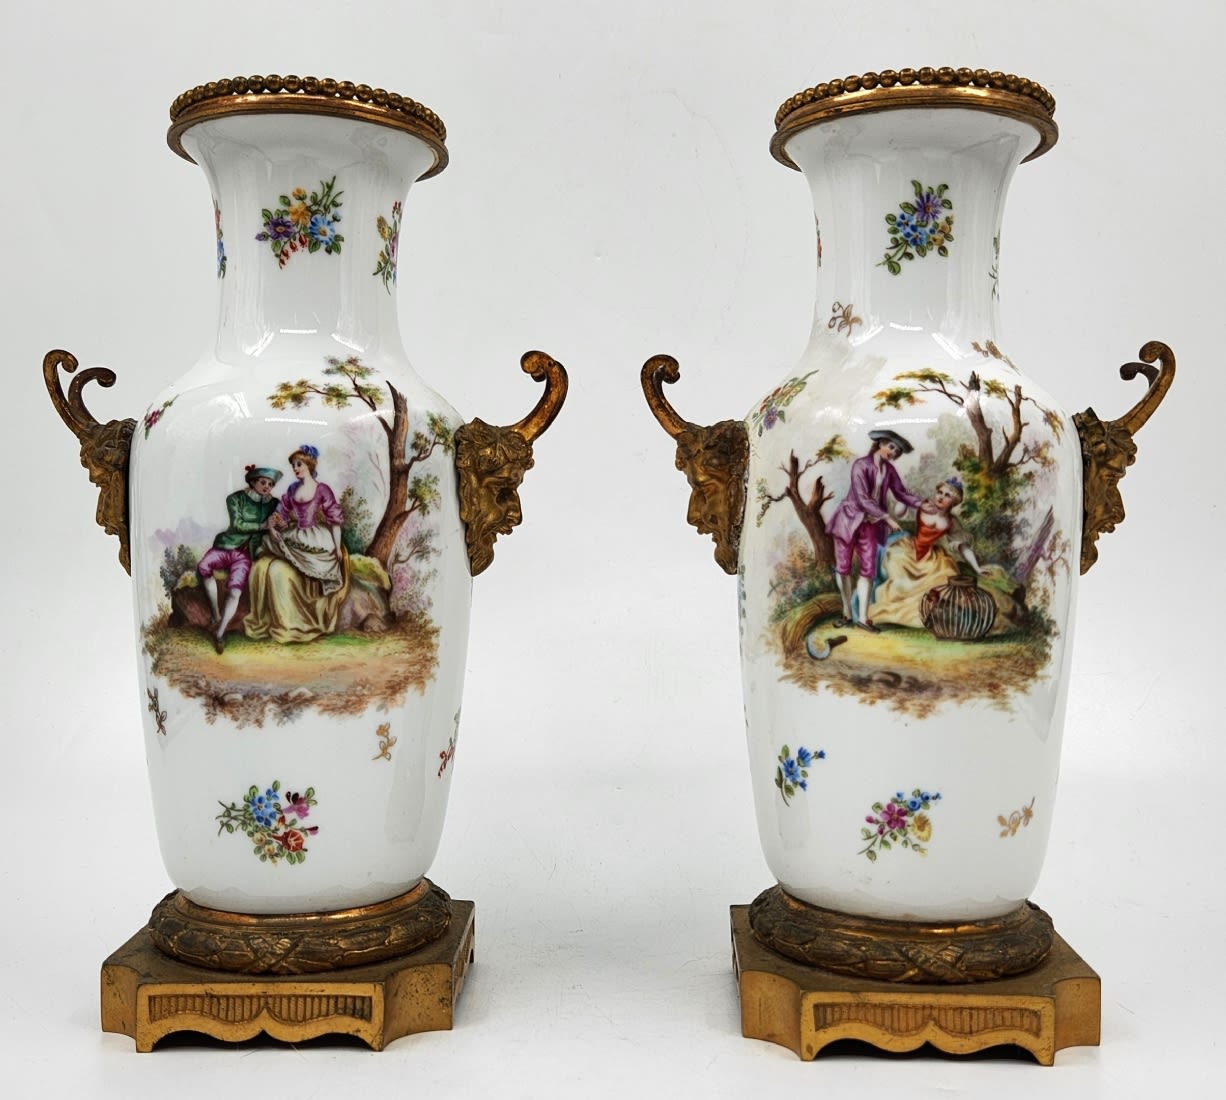 Antique French vase in 'Sevres' style, a beautiful and high-quality antique French vase from the